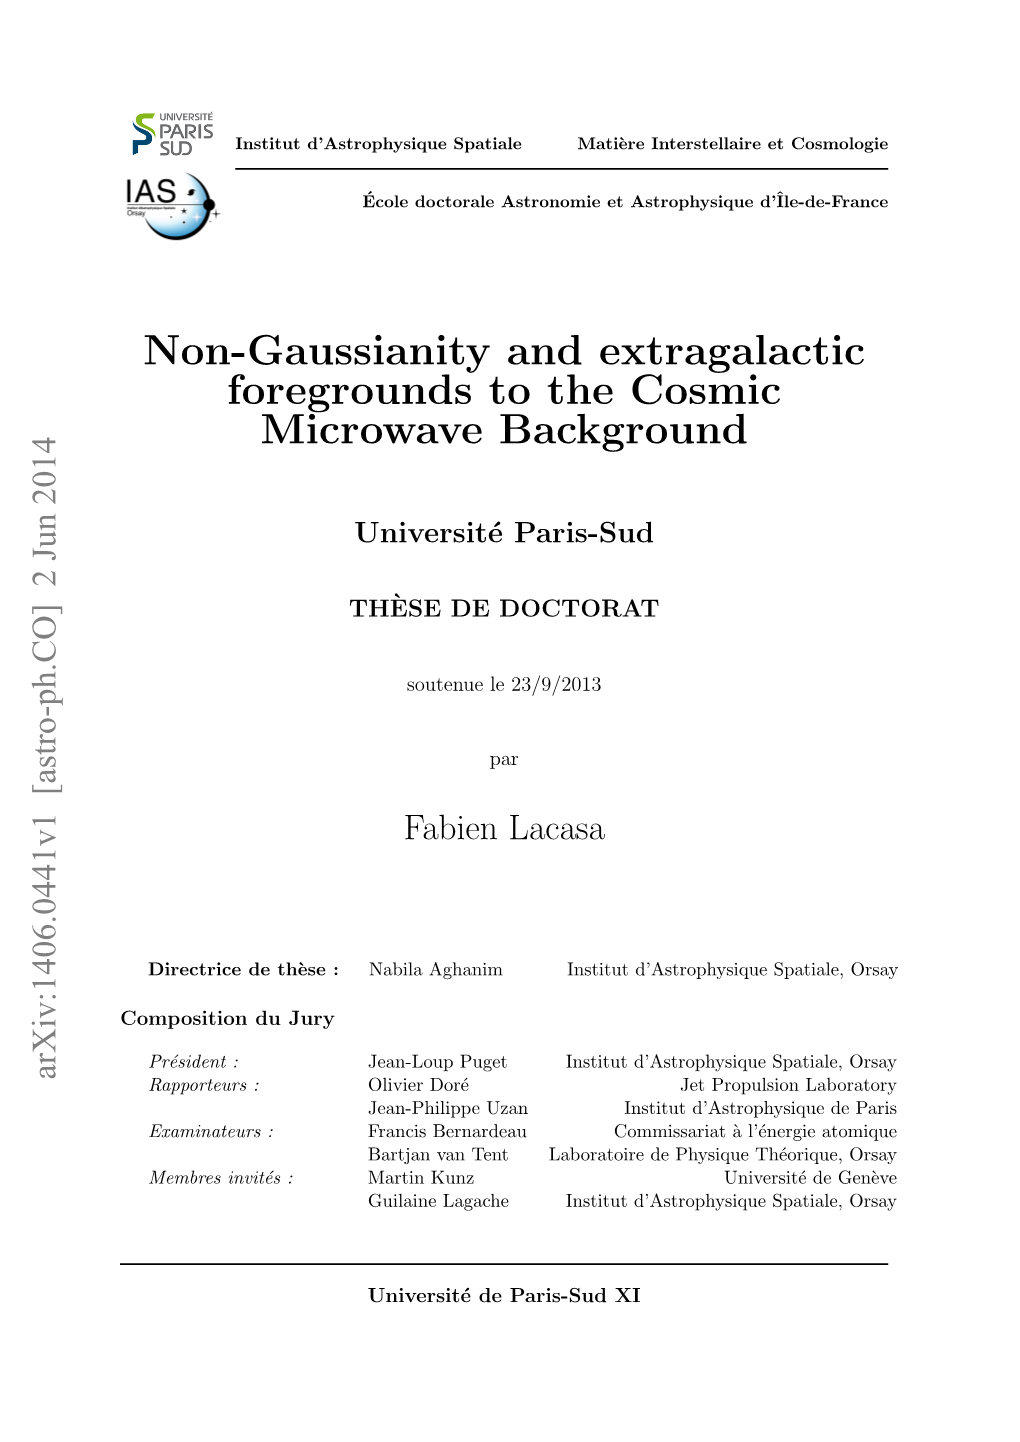 Non-Gaussianity and Extragalactic Foregrounds to the Cosmic Microwave Background